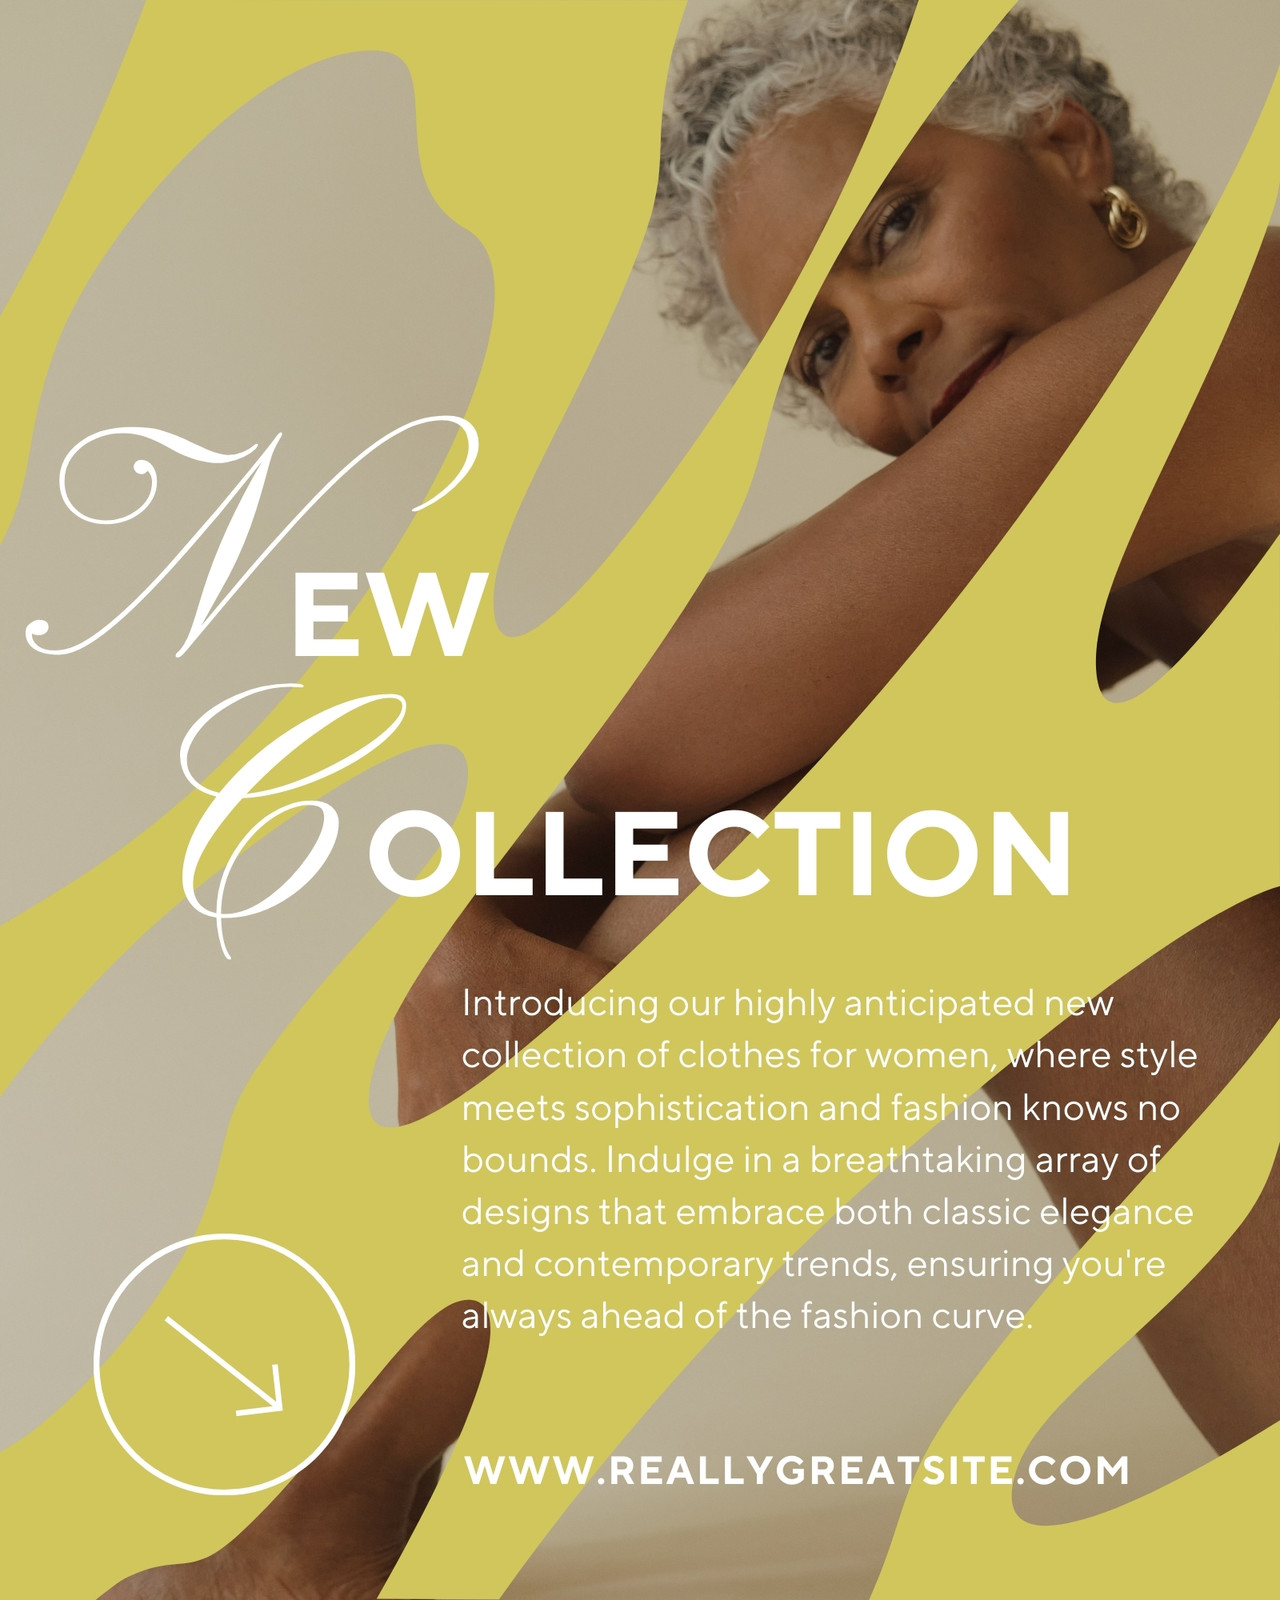 Yellow Photo Elegant Fashion Show Flyer - Templates by Canva